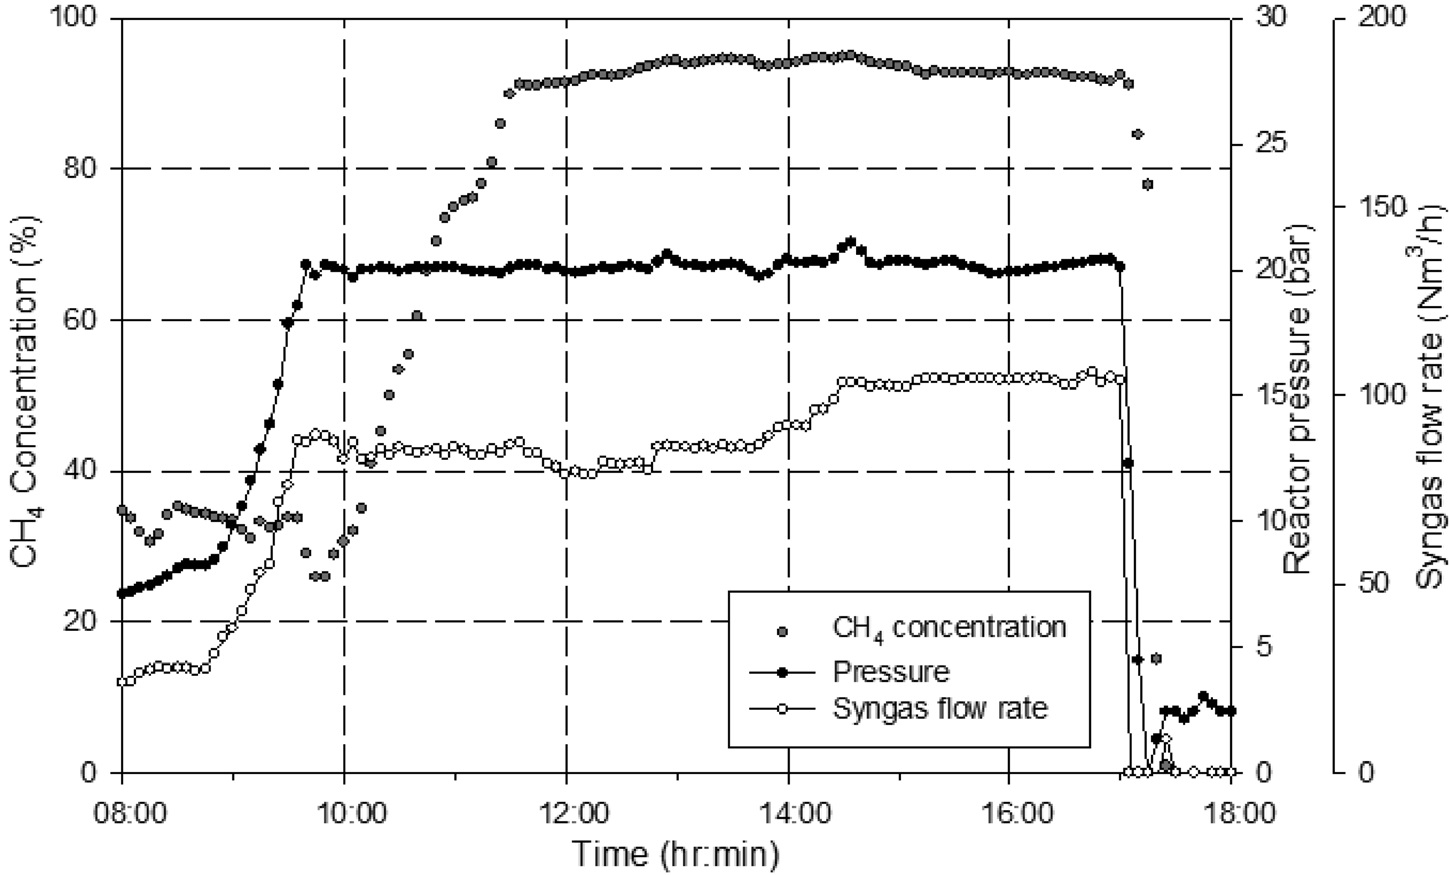 Pressure, syngas flow rate, CH4 concentration of SNG (2nd operation).